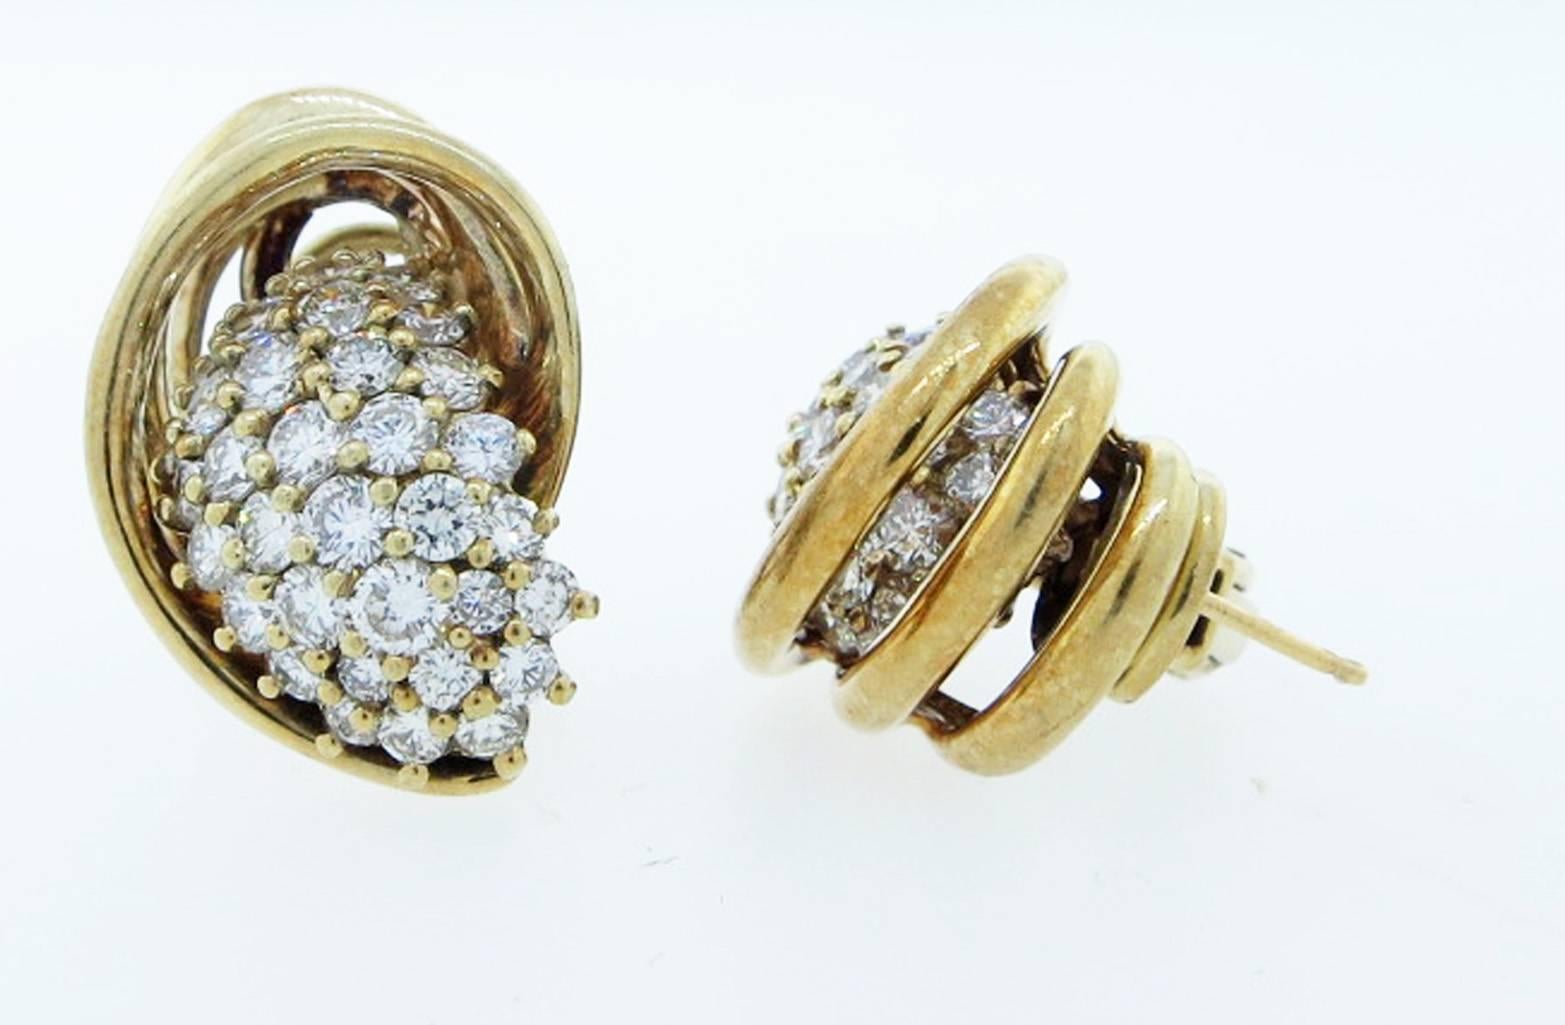 Dimensional design 18kt yellow gold earrings made by Jose' Hess . Each of the 14kt. clip and post back earring is set with 33 round brilliant cut diamonds spilling forth grading Vs clarity H color. Total diamond weigh approx 2.5.0 cts.